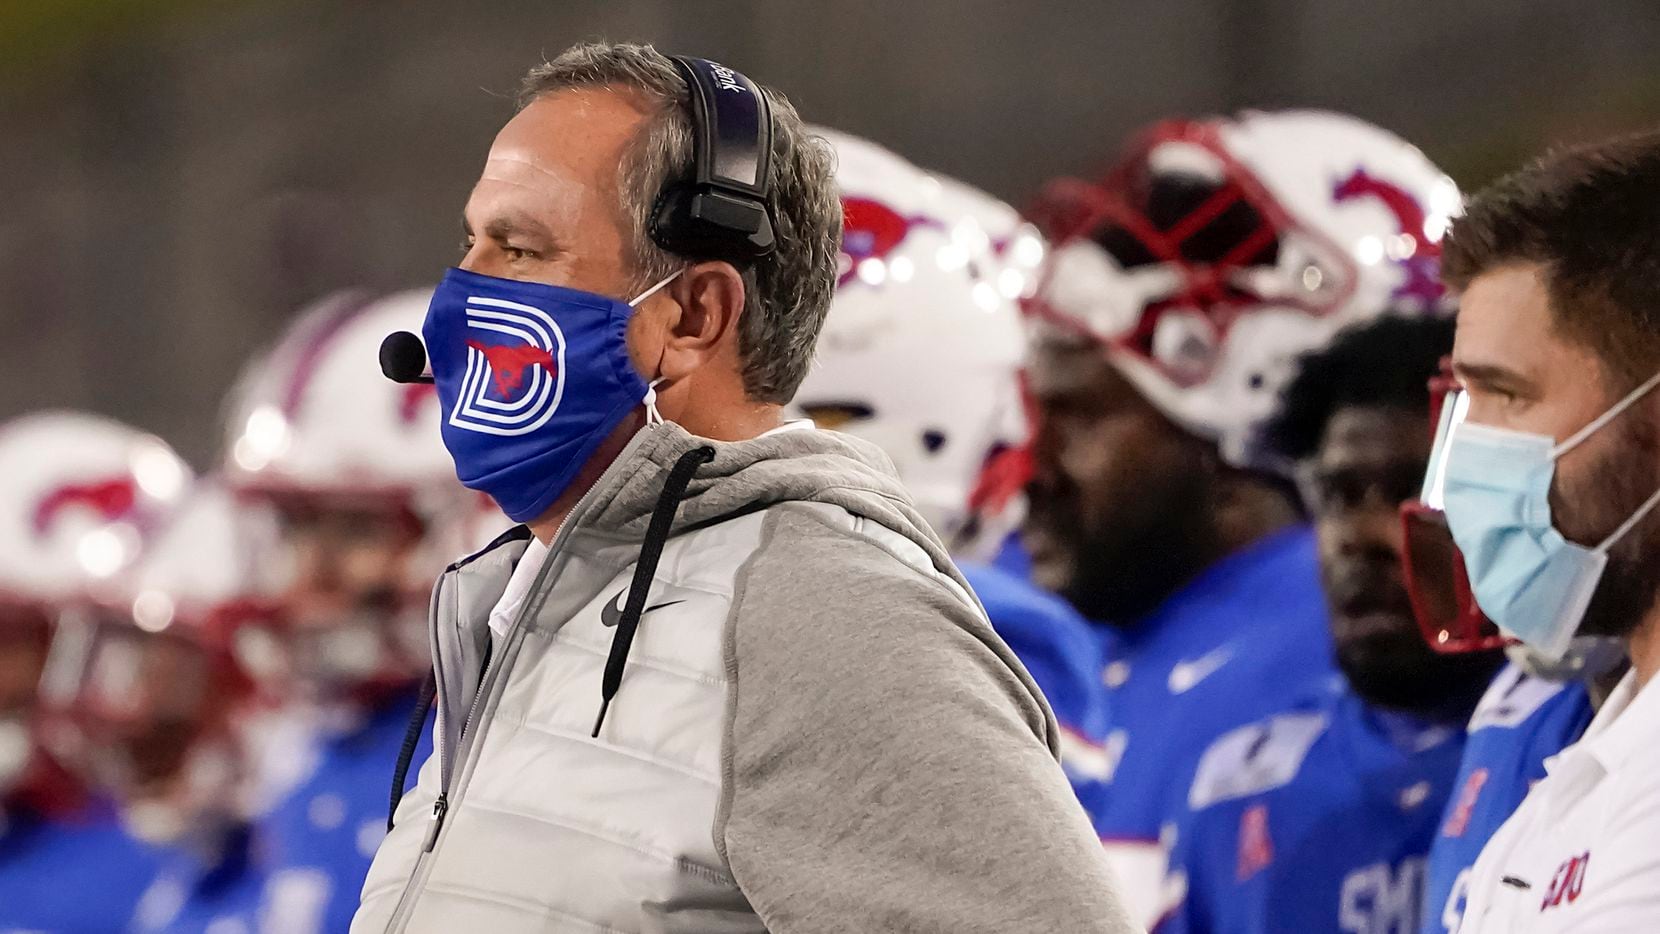 SMU head coach Sonny Dykes watches from the sidelines during the first quarter of an NCAA football game against Navy at Ford Stadium on Saturday, Oct. 31, 2020, in Dallas.